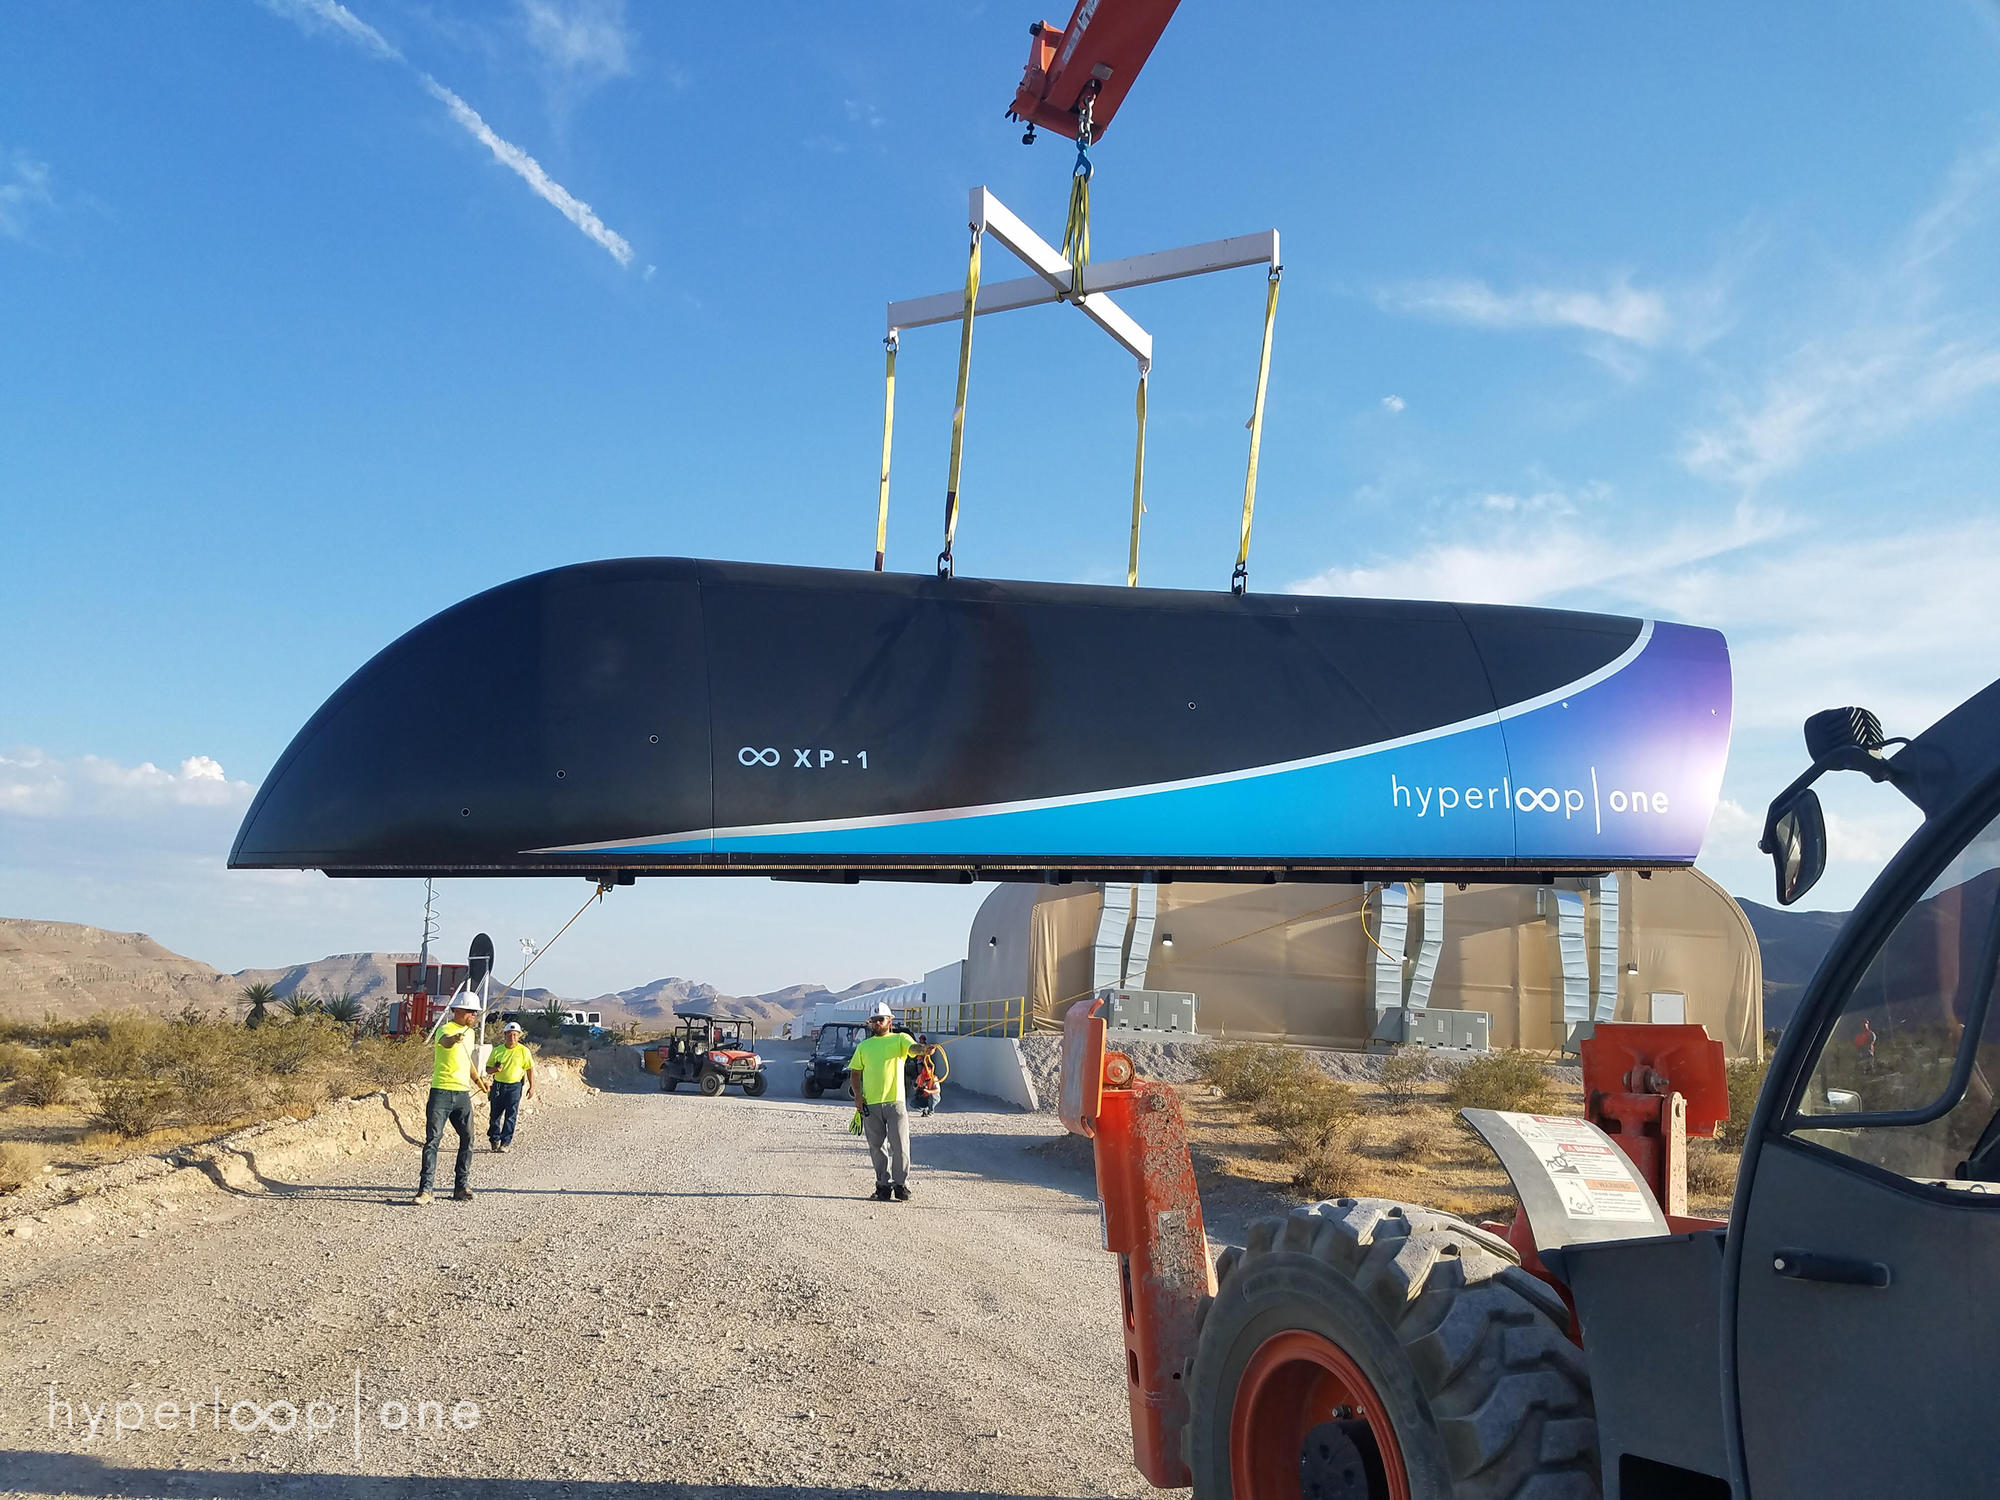 The Hyperloop One XP-1 is the company’s first-generation pod.